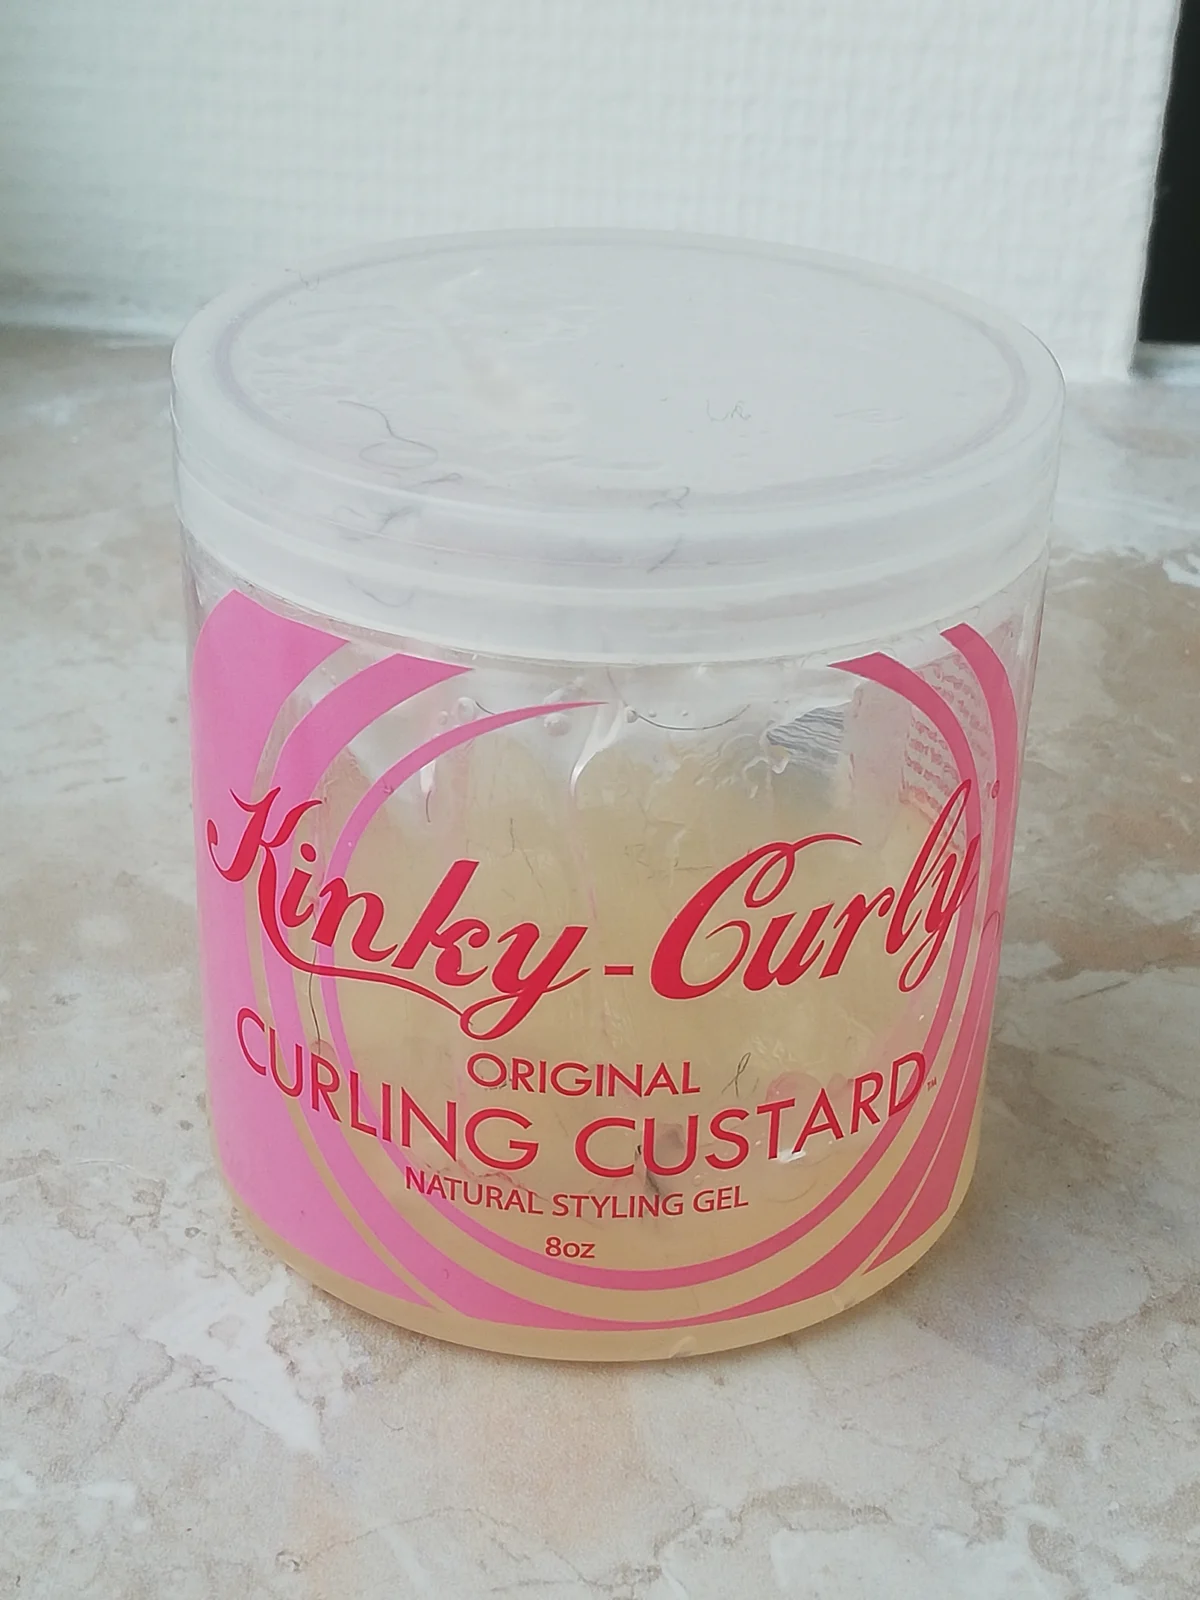 Styling Gel Curling Custard 225 g - review image